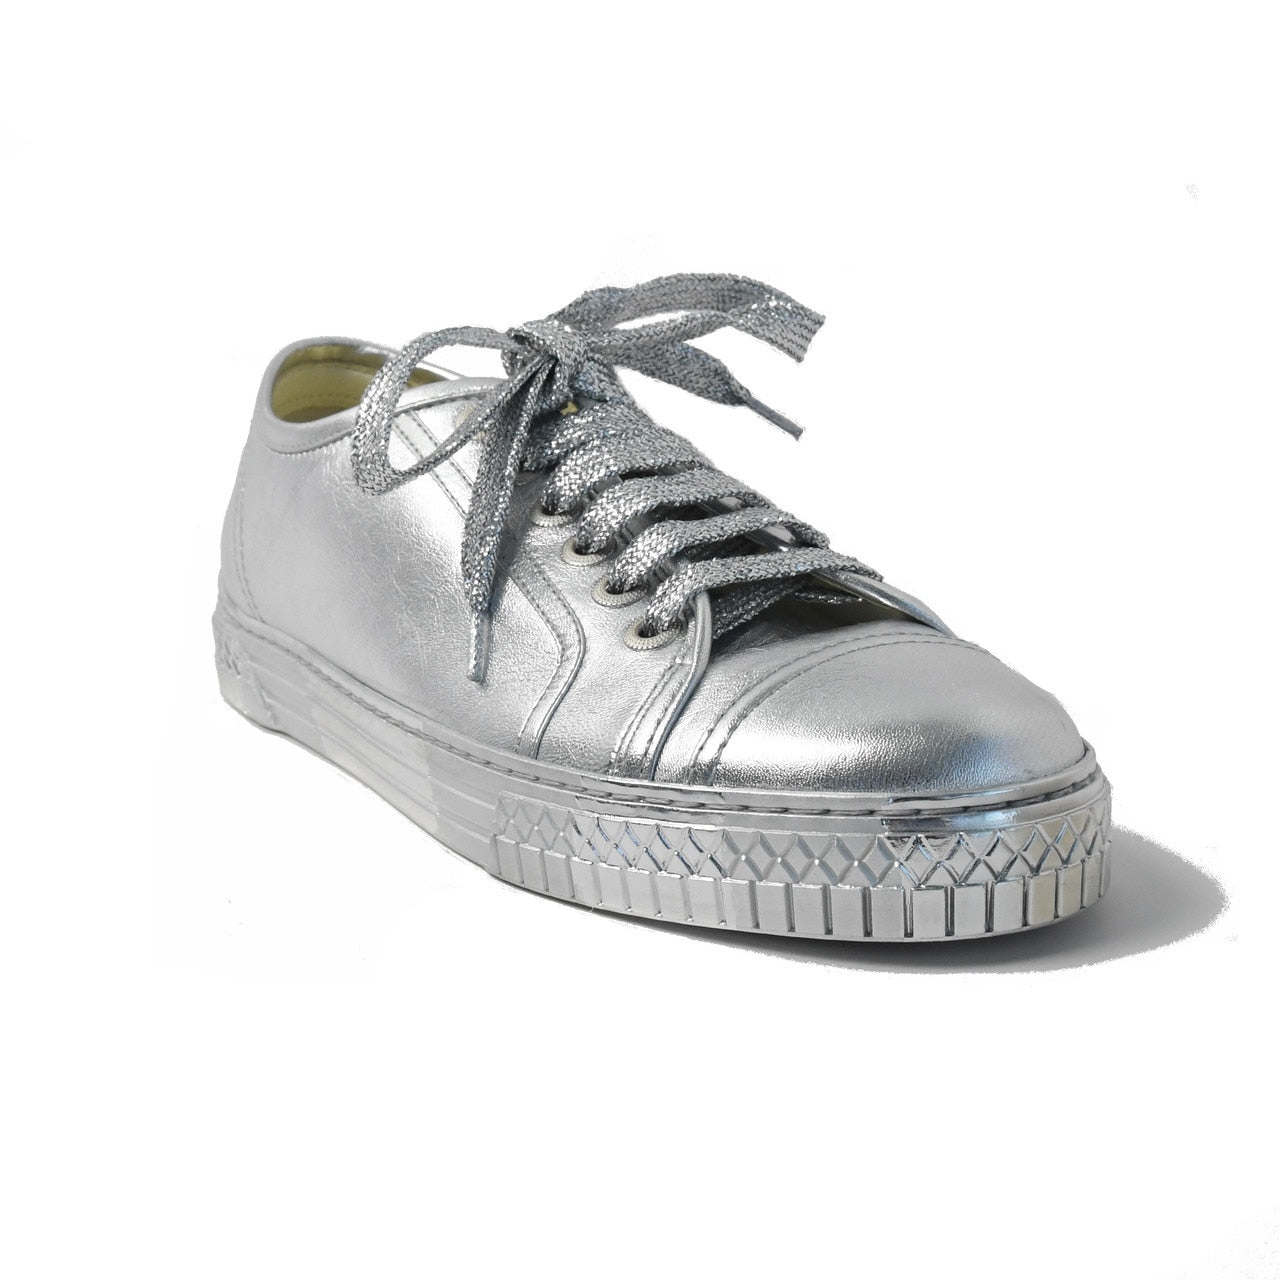 CHANEL, Shoes, Chanel Laminated Lambskin Sneakers Silver